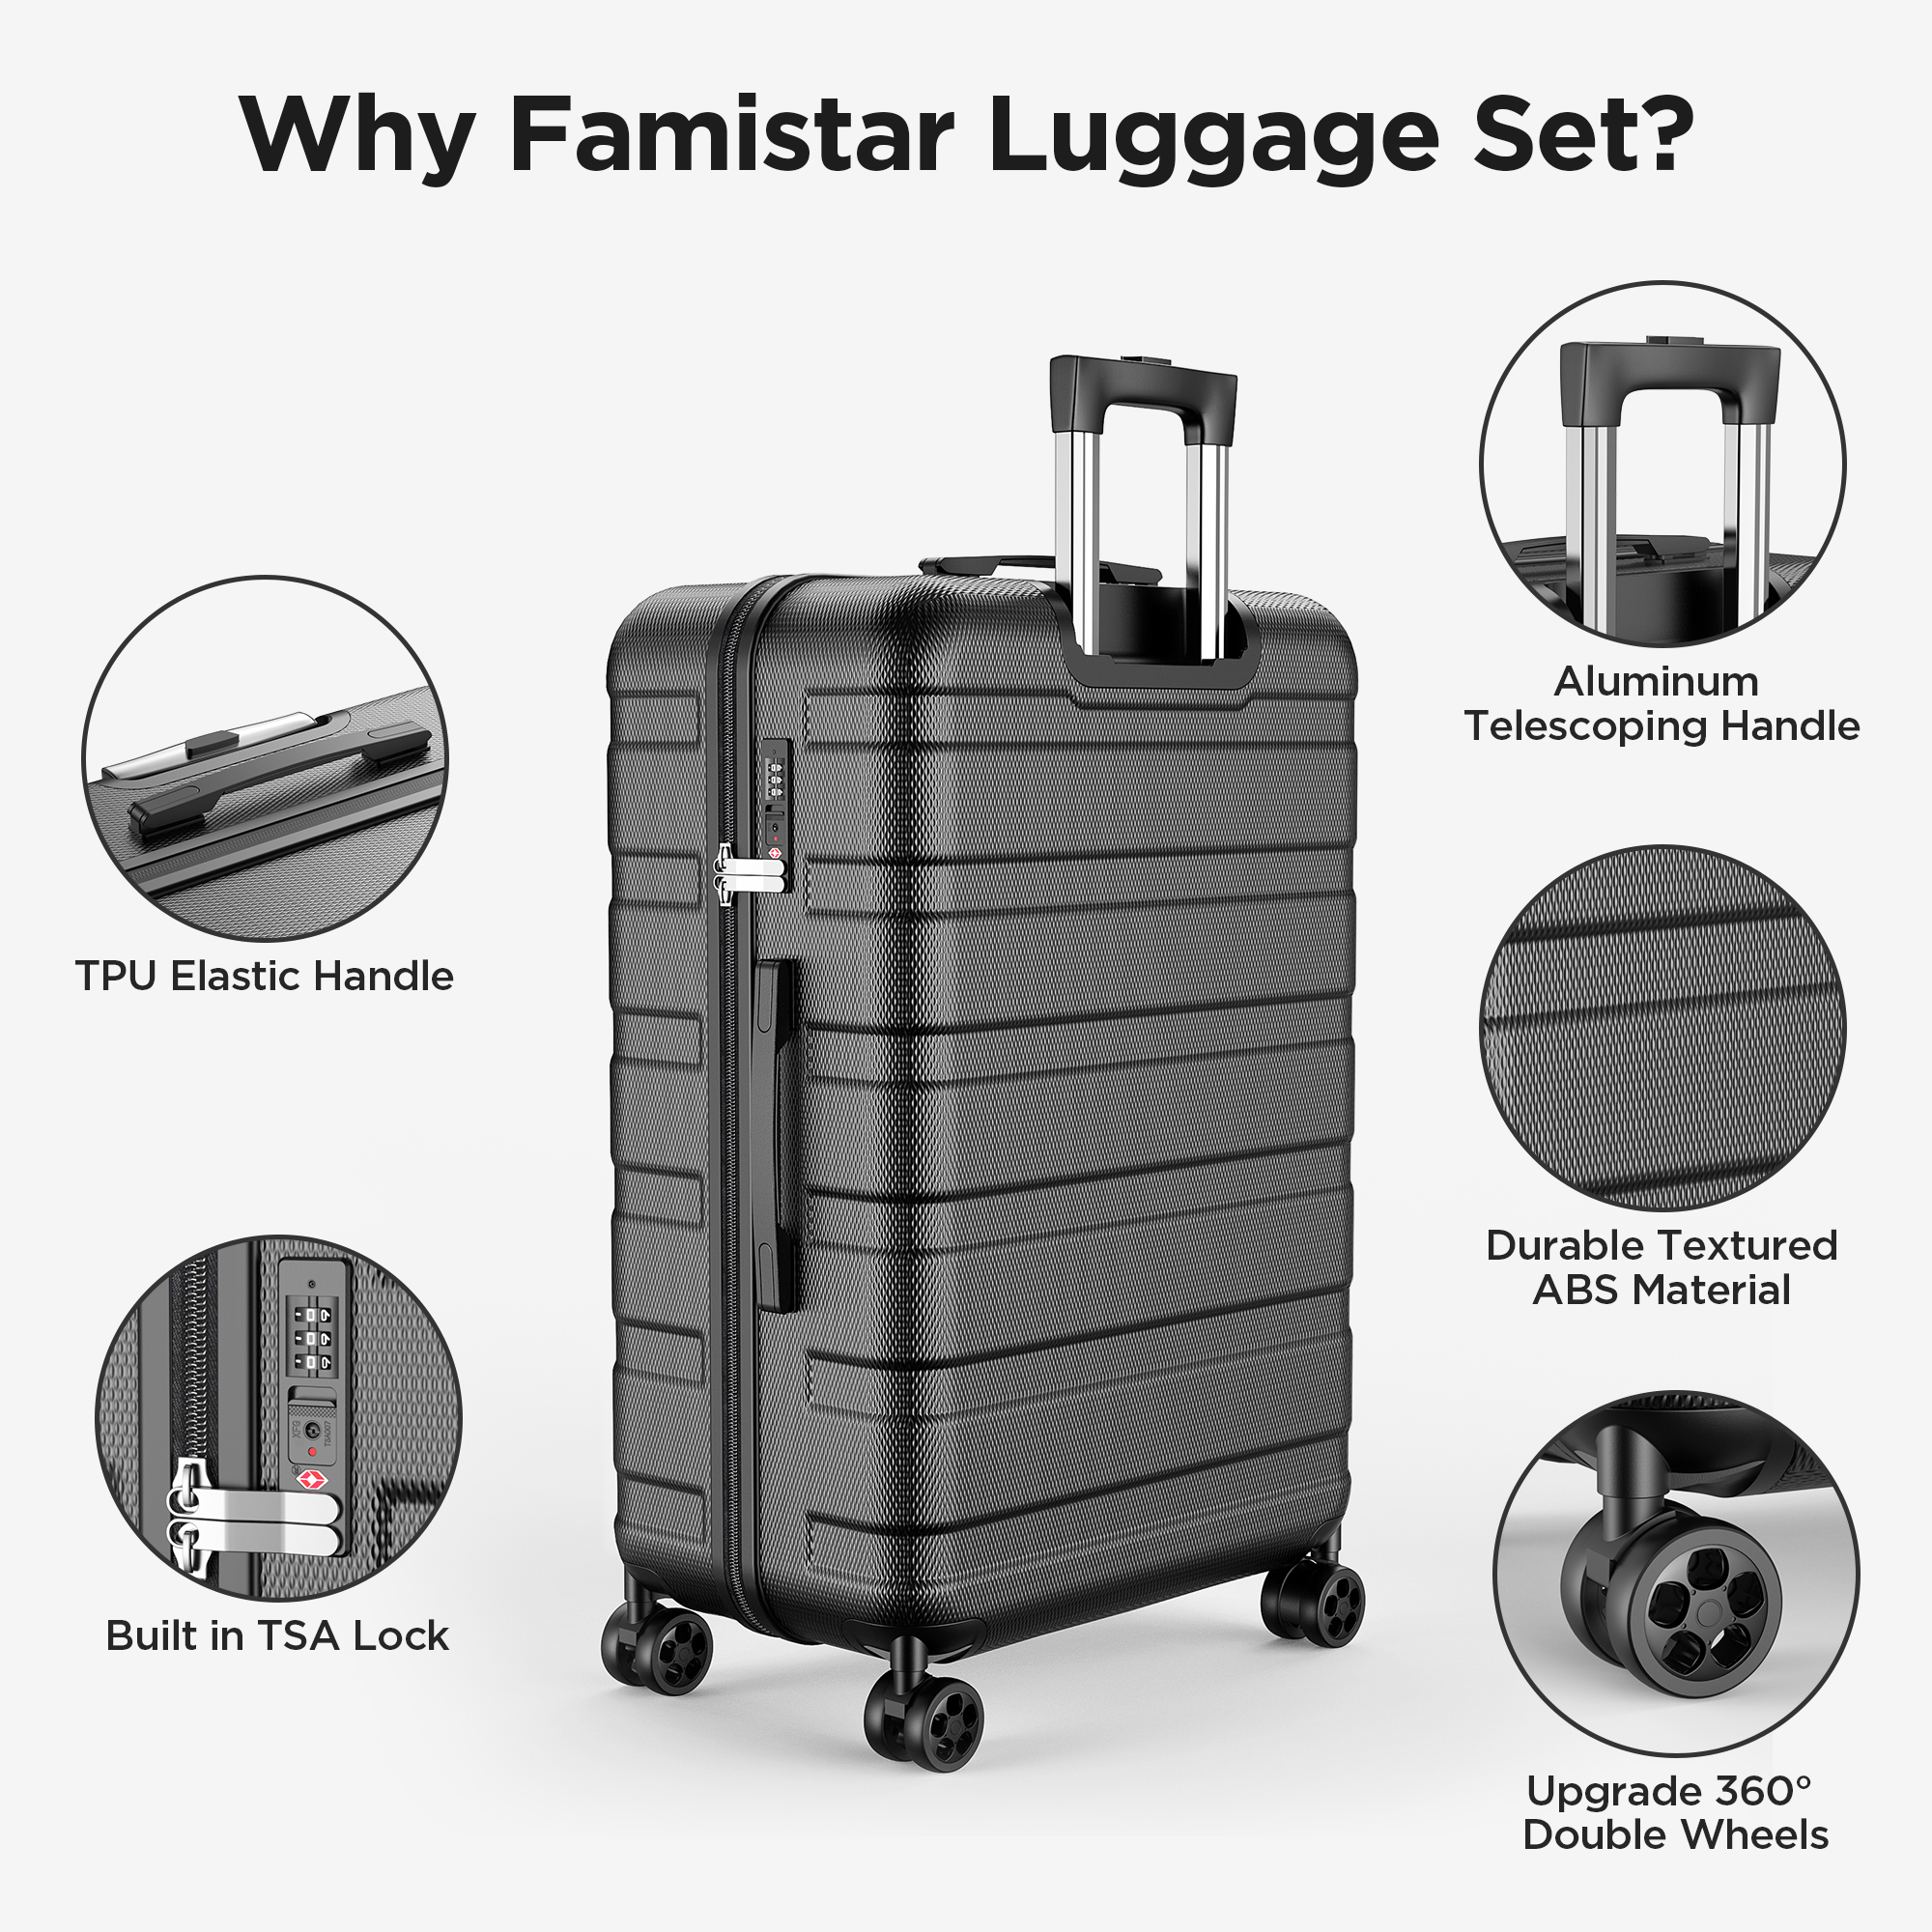 Famistar 4 Piece Hardside Luggage Suitcase Set with 360° Double Spinner Wheels Integrated TSA Lock, 14” Travel Case, 20" Carry-On Luggage, 24" Checked Luggage and 28" Checked Luggage, Black - image 3 of 11